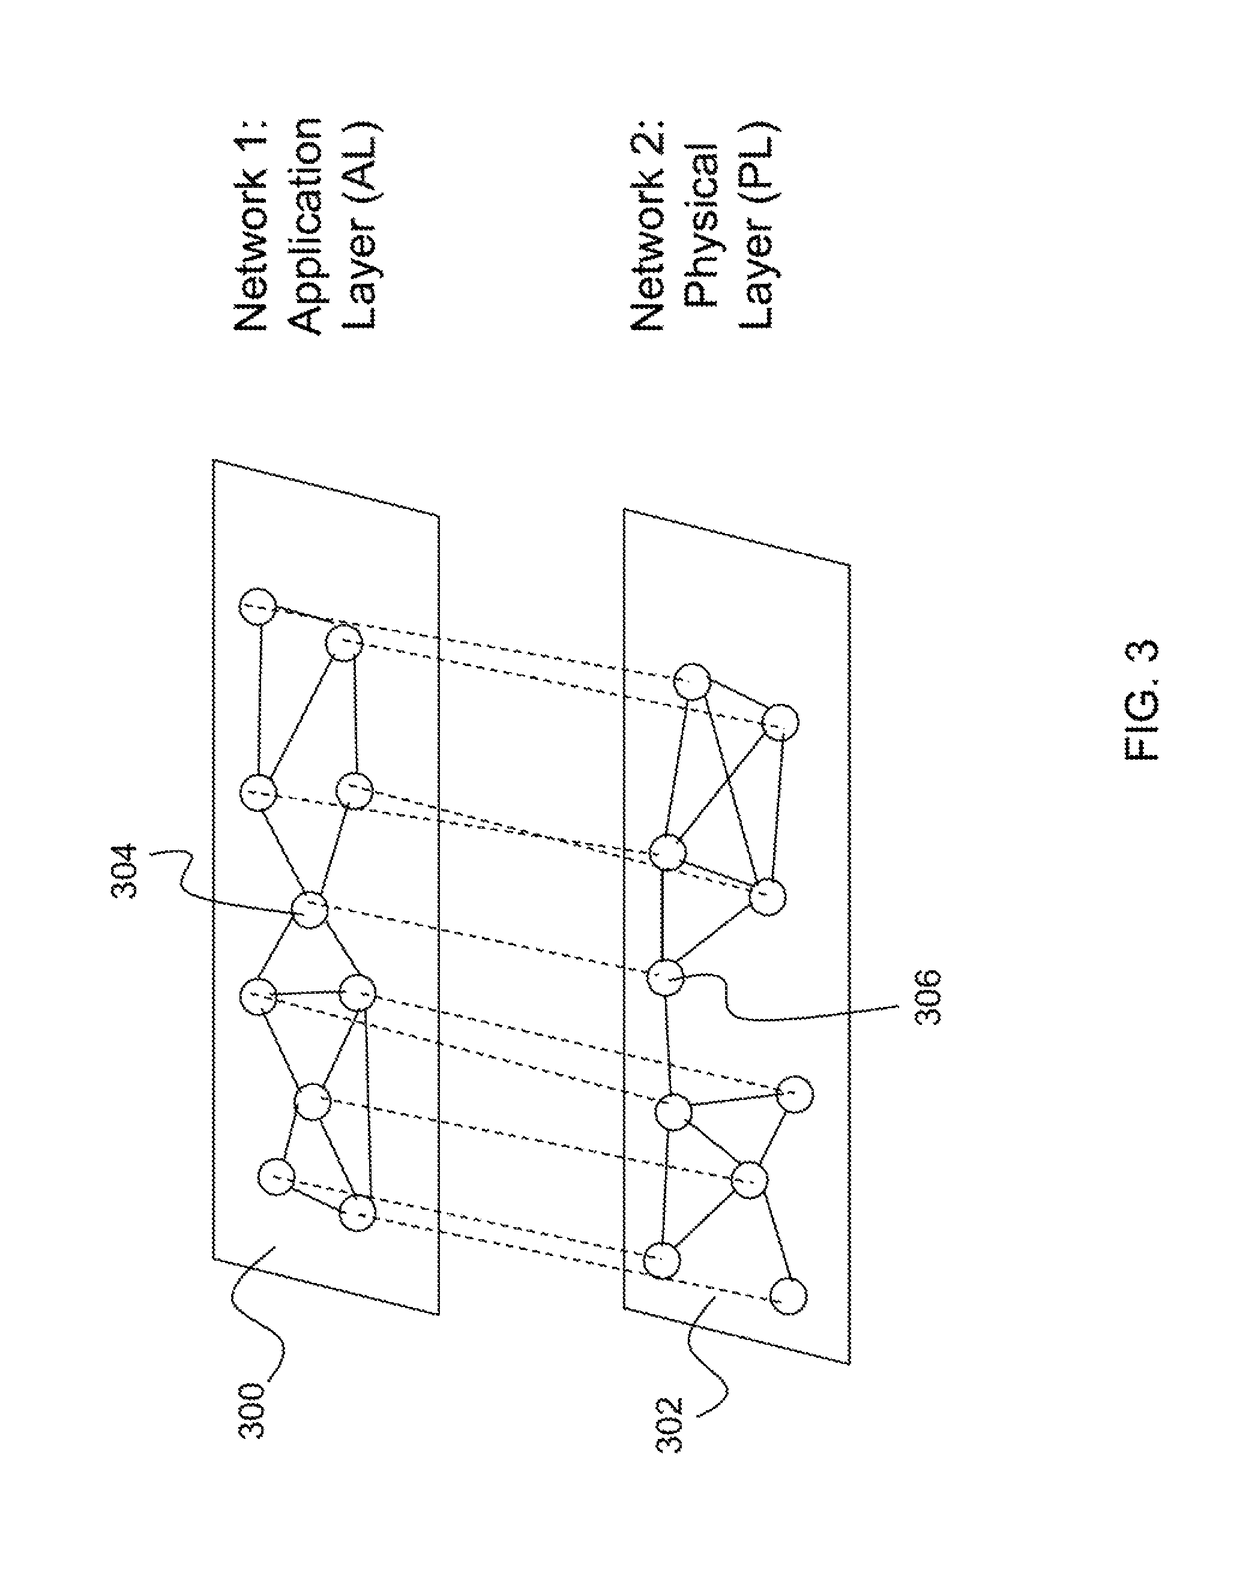 Method for determining contagion dynamics on a multilayer network